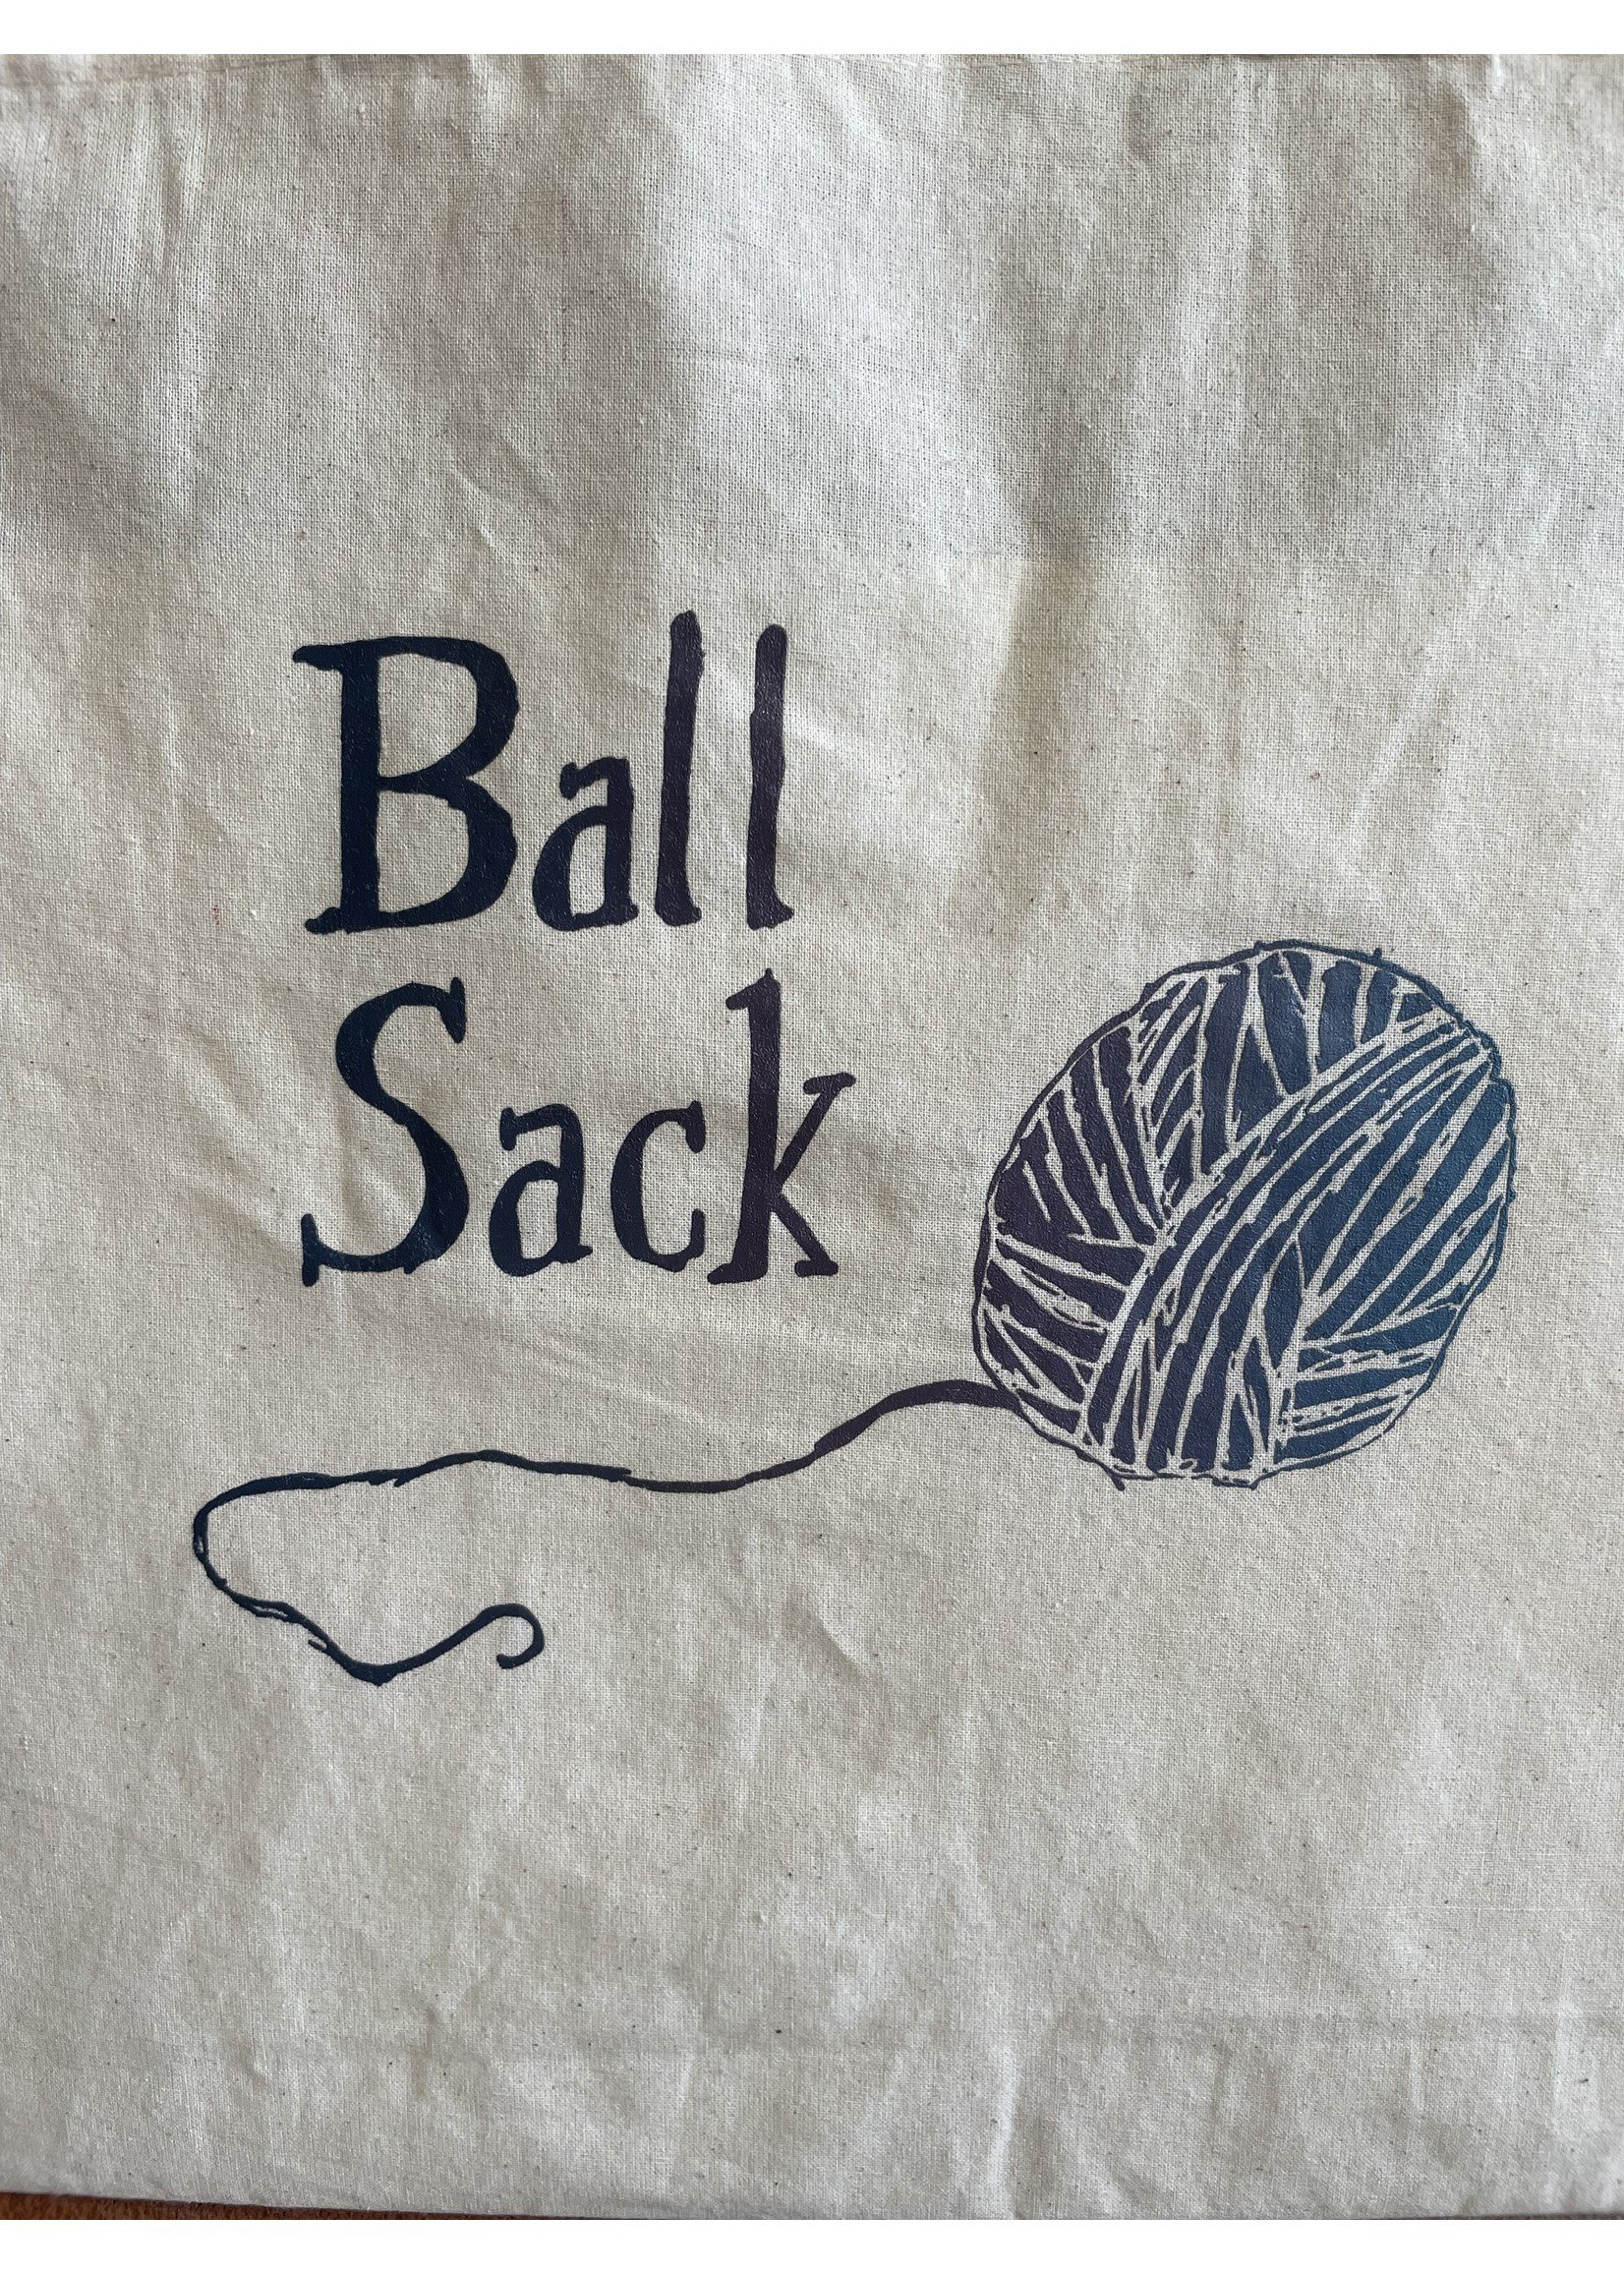 Tangled Up In Hue Wholesale Tote Bag - Ball Sack